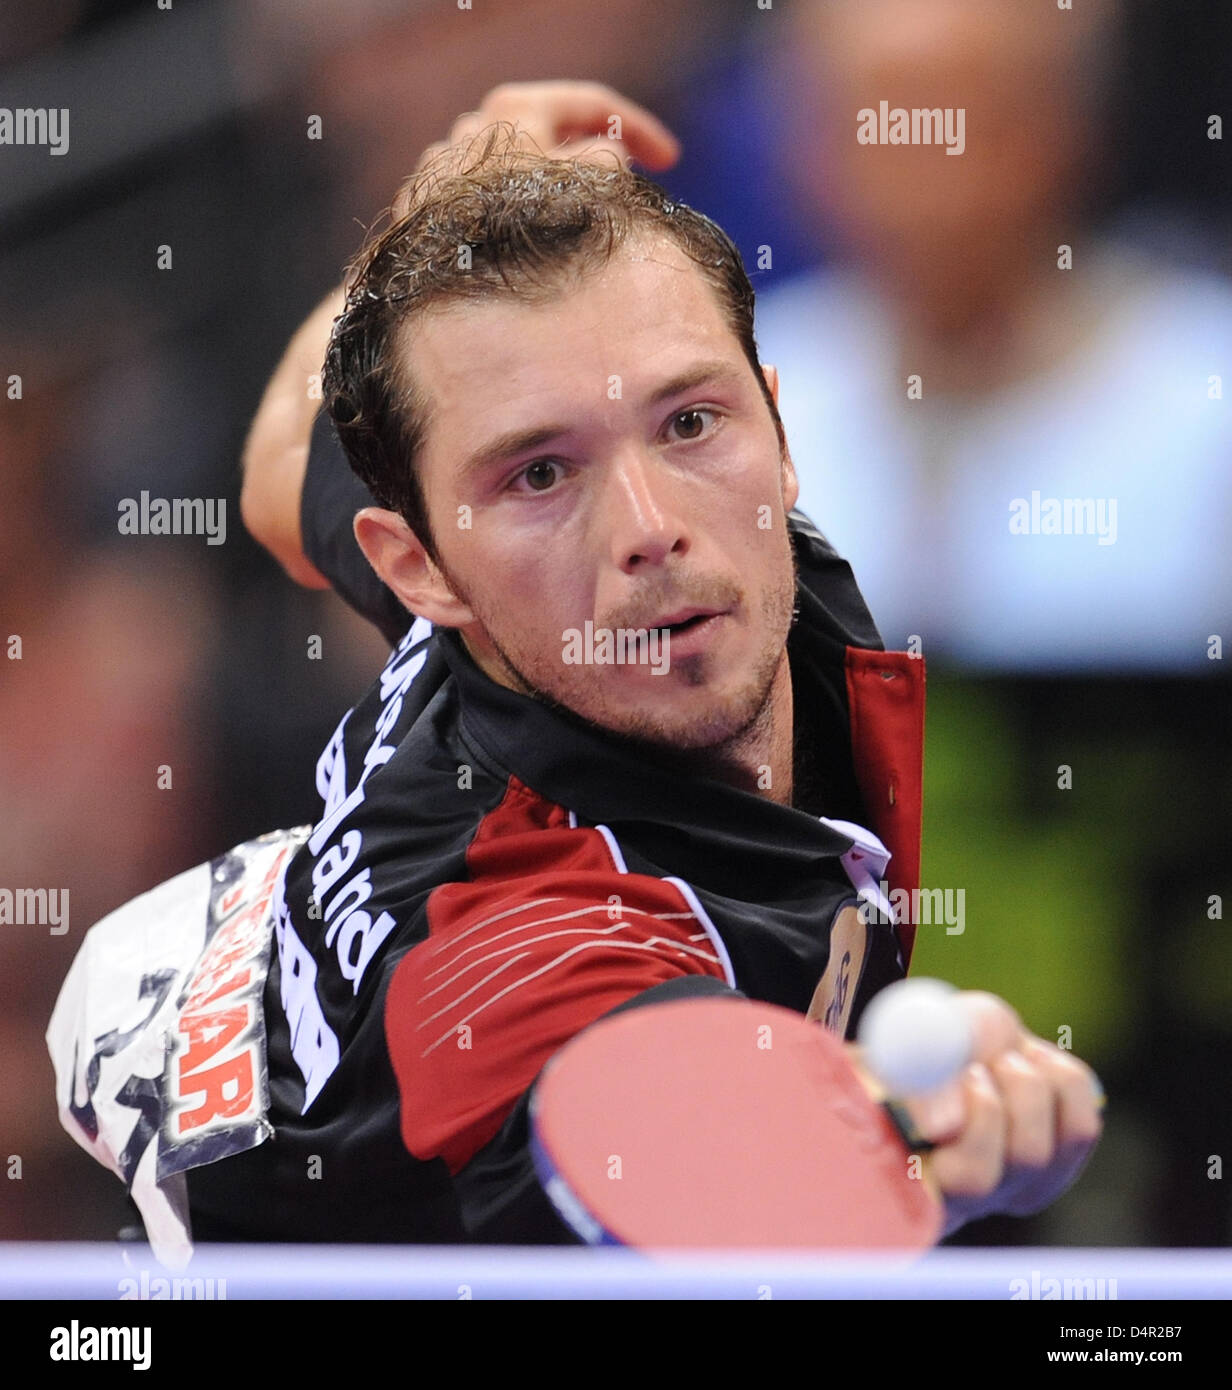 Zoltan Fejer-Konnerth from Germany plays against Schlager from Austria during the men?s singles competition of the European Table Tennis Championships at Porsche-Arena stadium in Stuttgart, Germany, 18 September 2009. Photo: Bernd Weissbrod Stock Photo